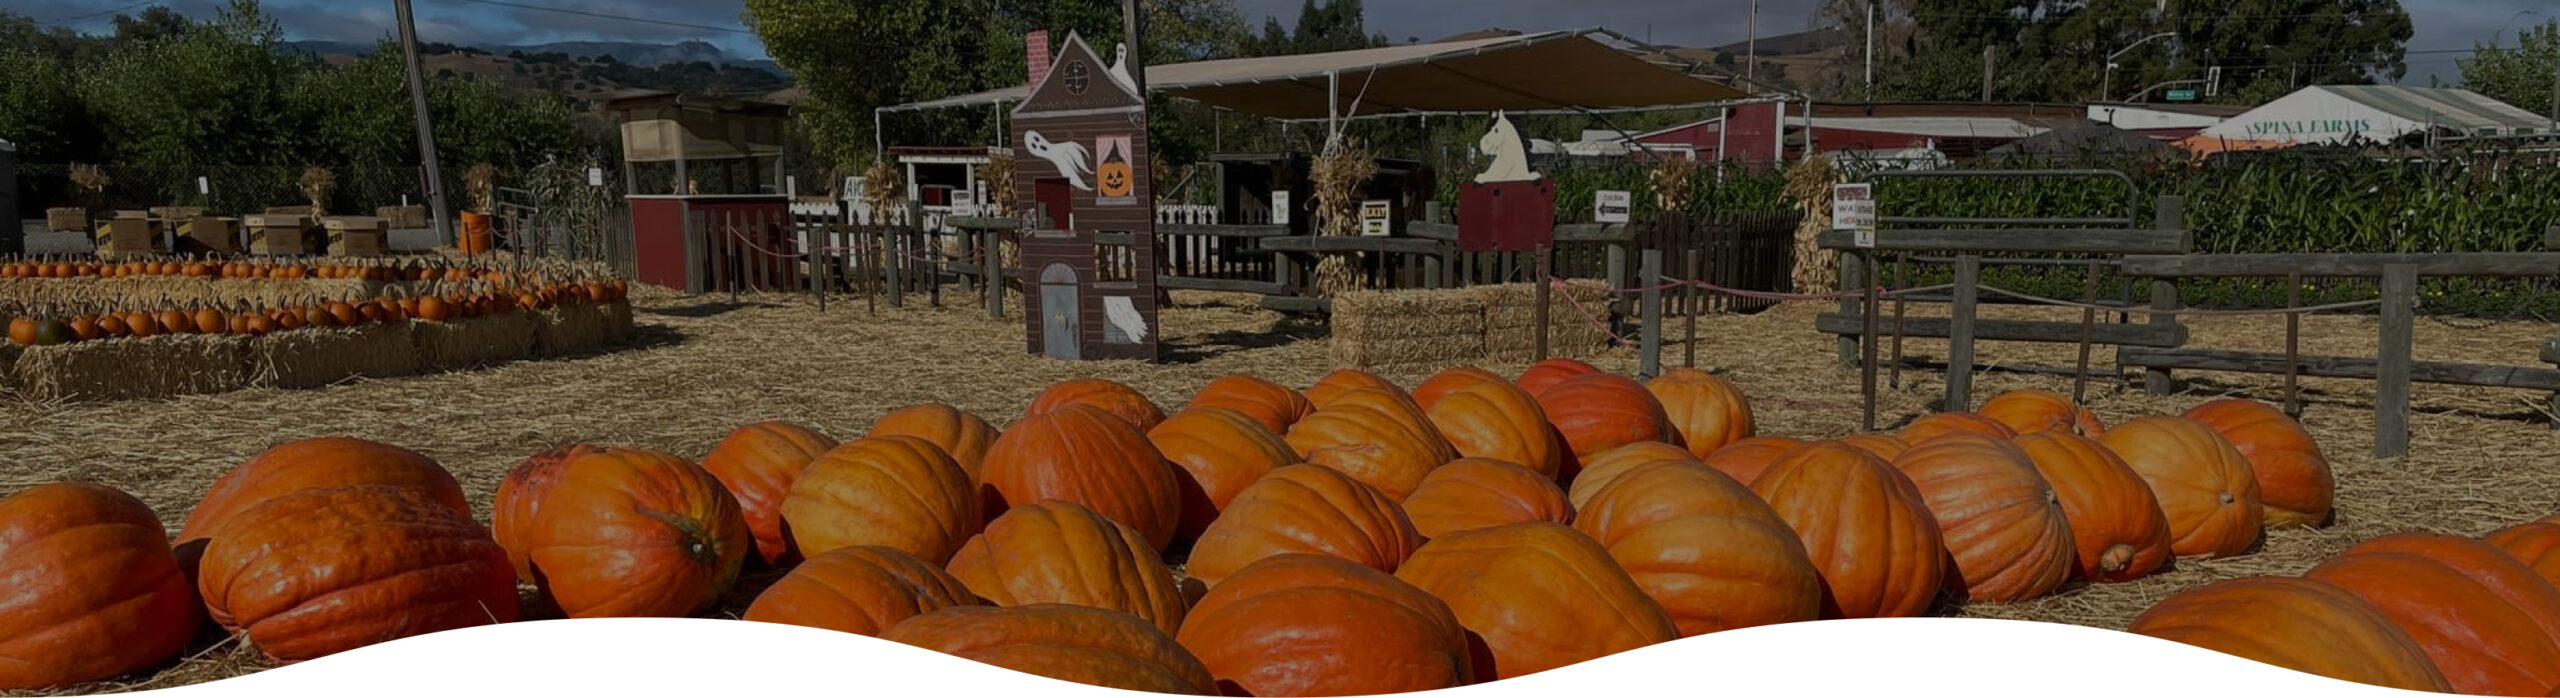 Spina Farms Web Accessibility banner